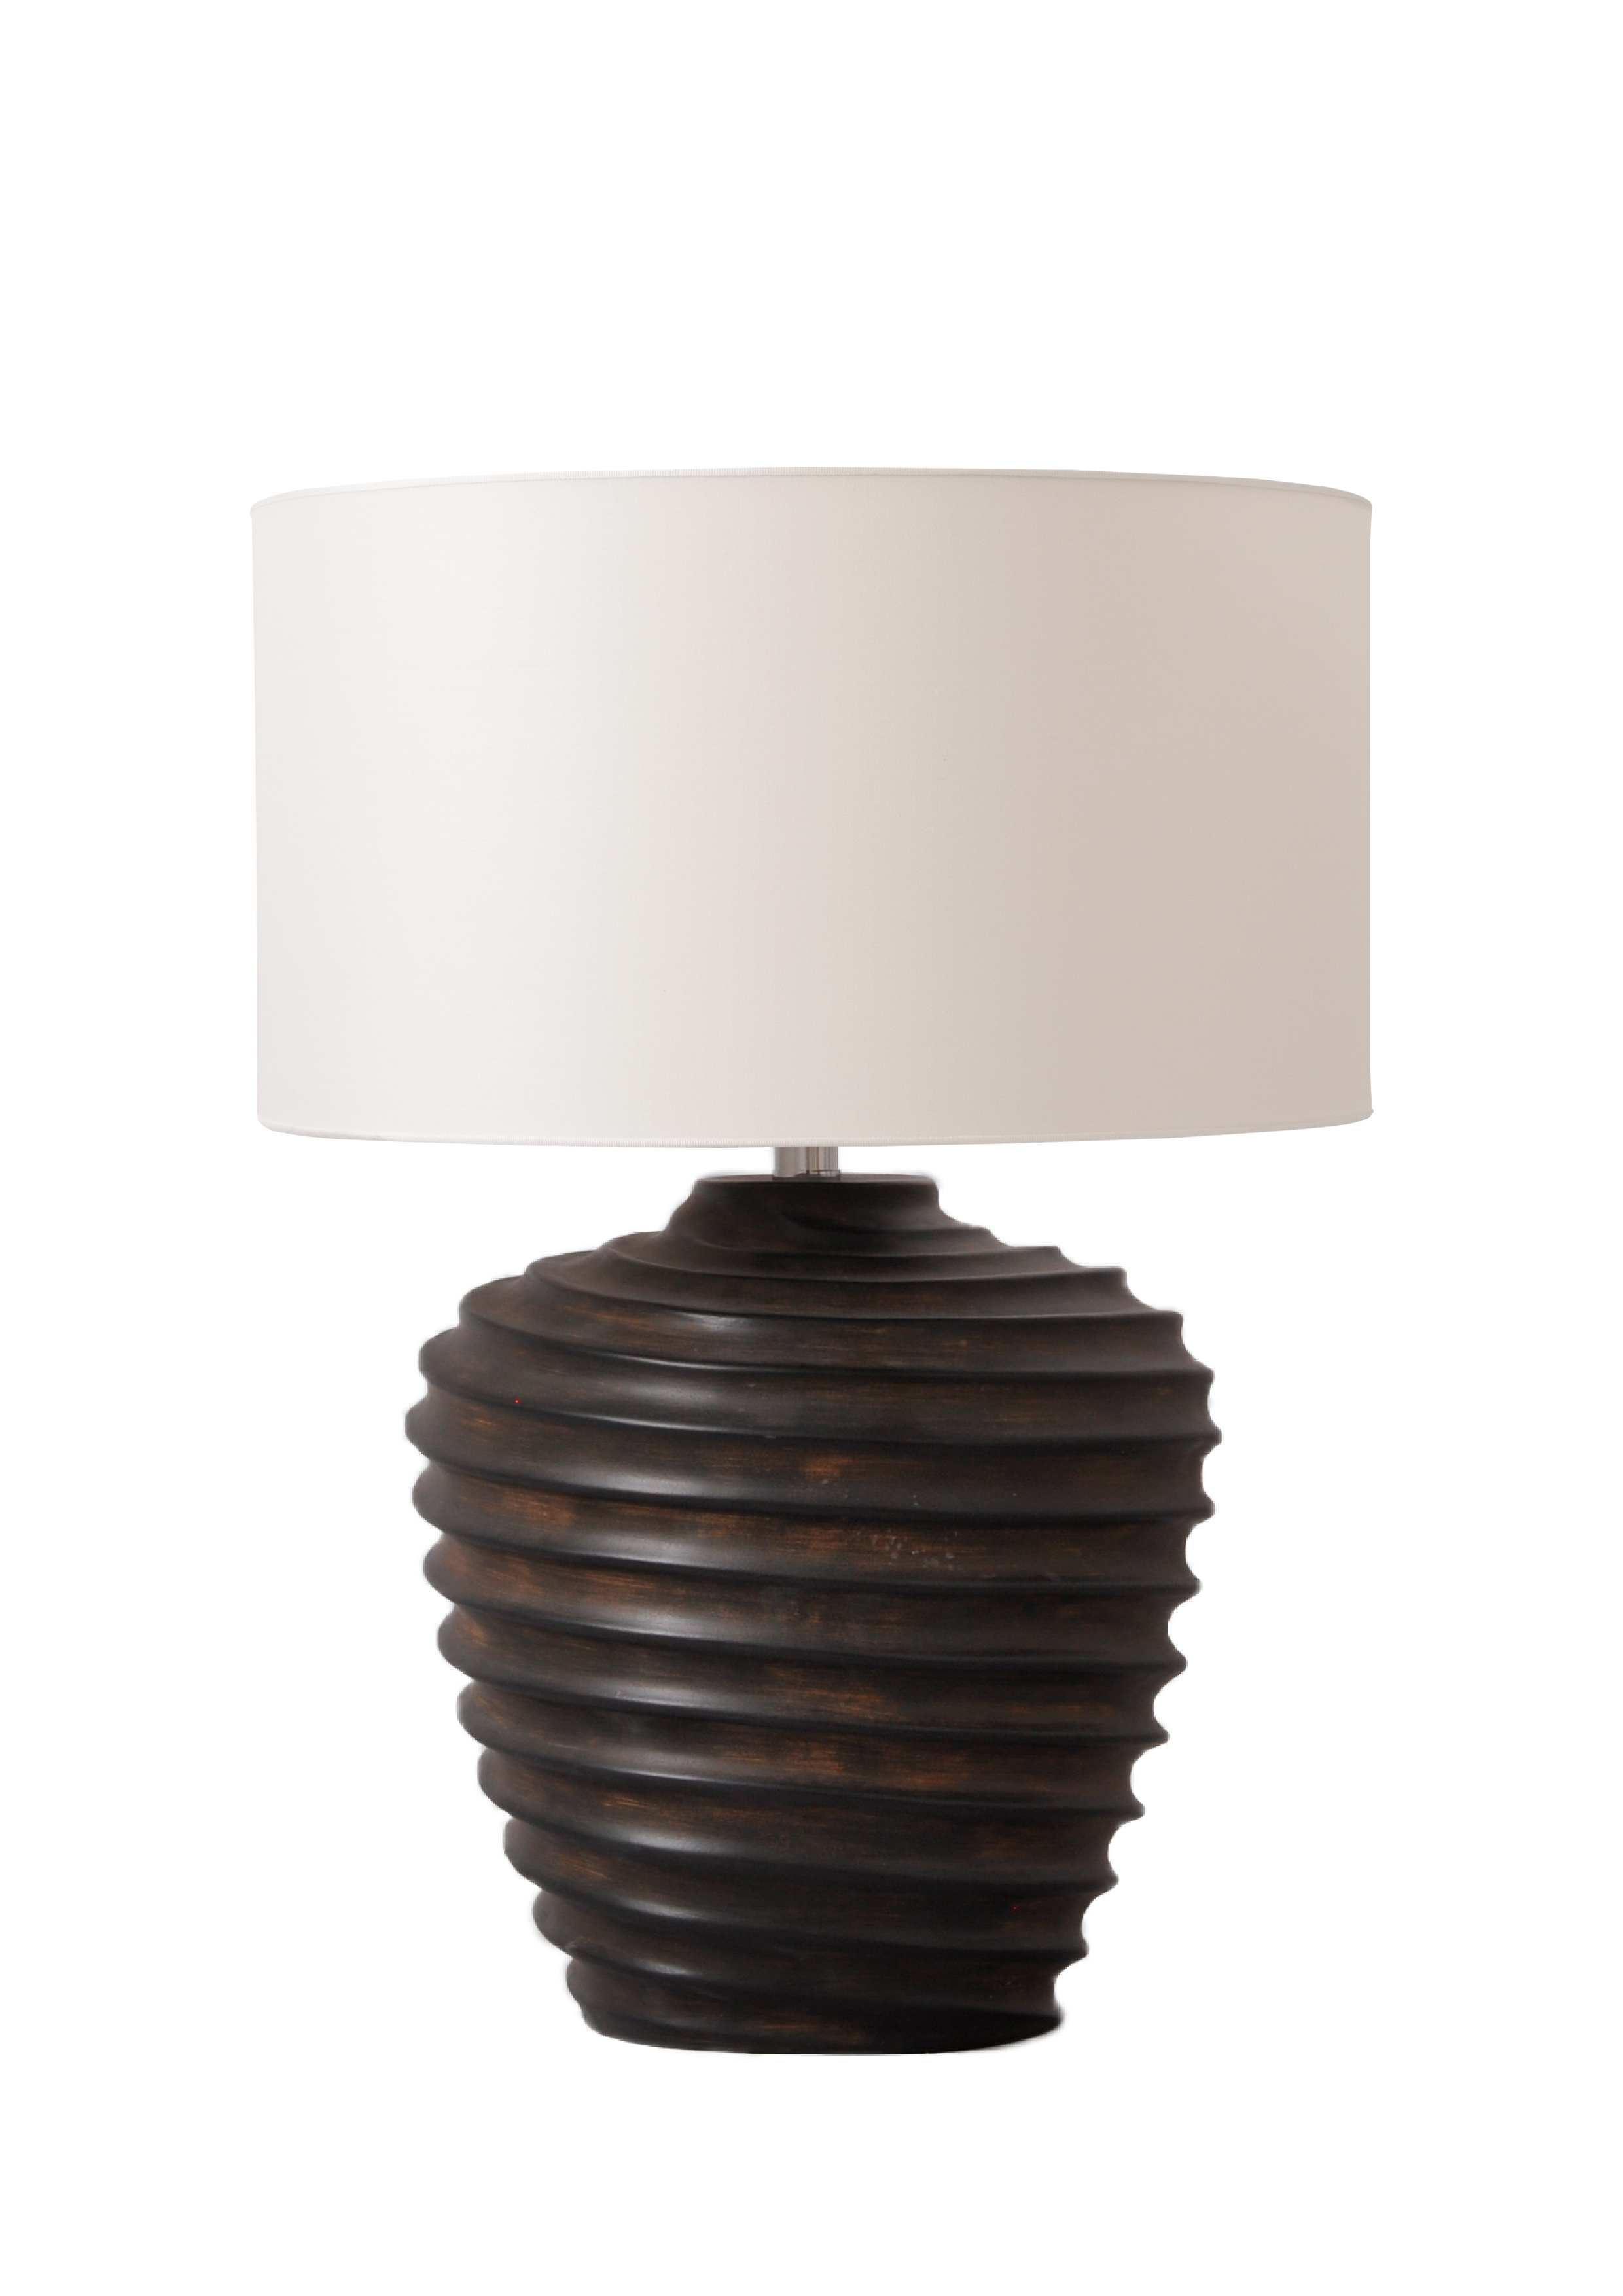 2Table lamp 